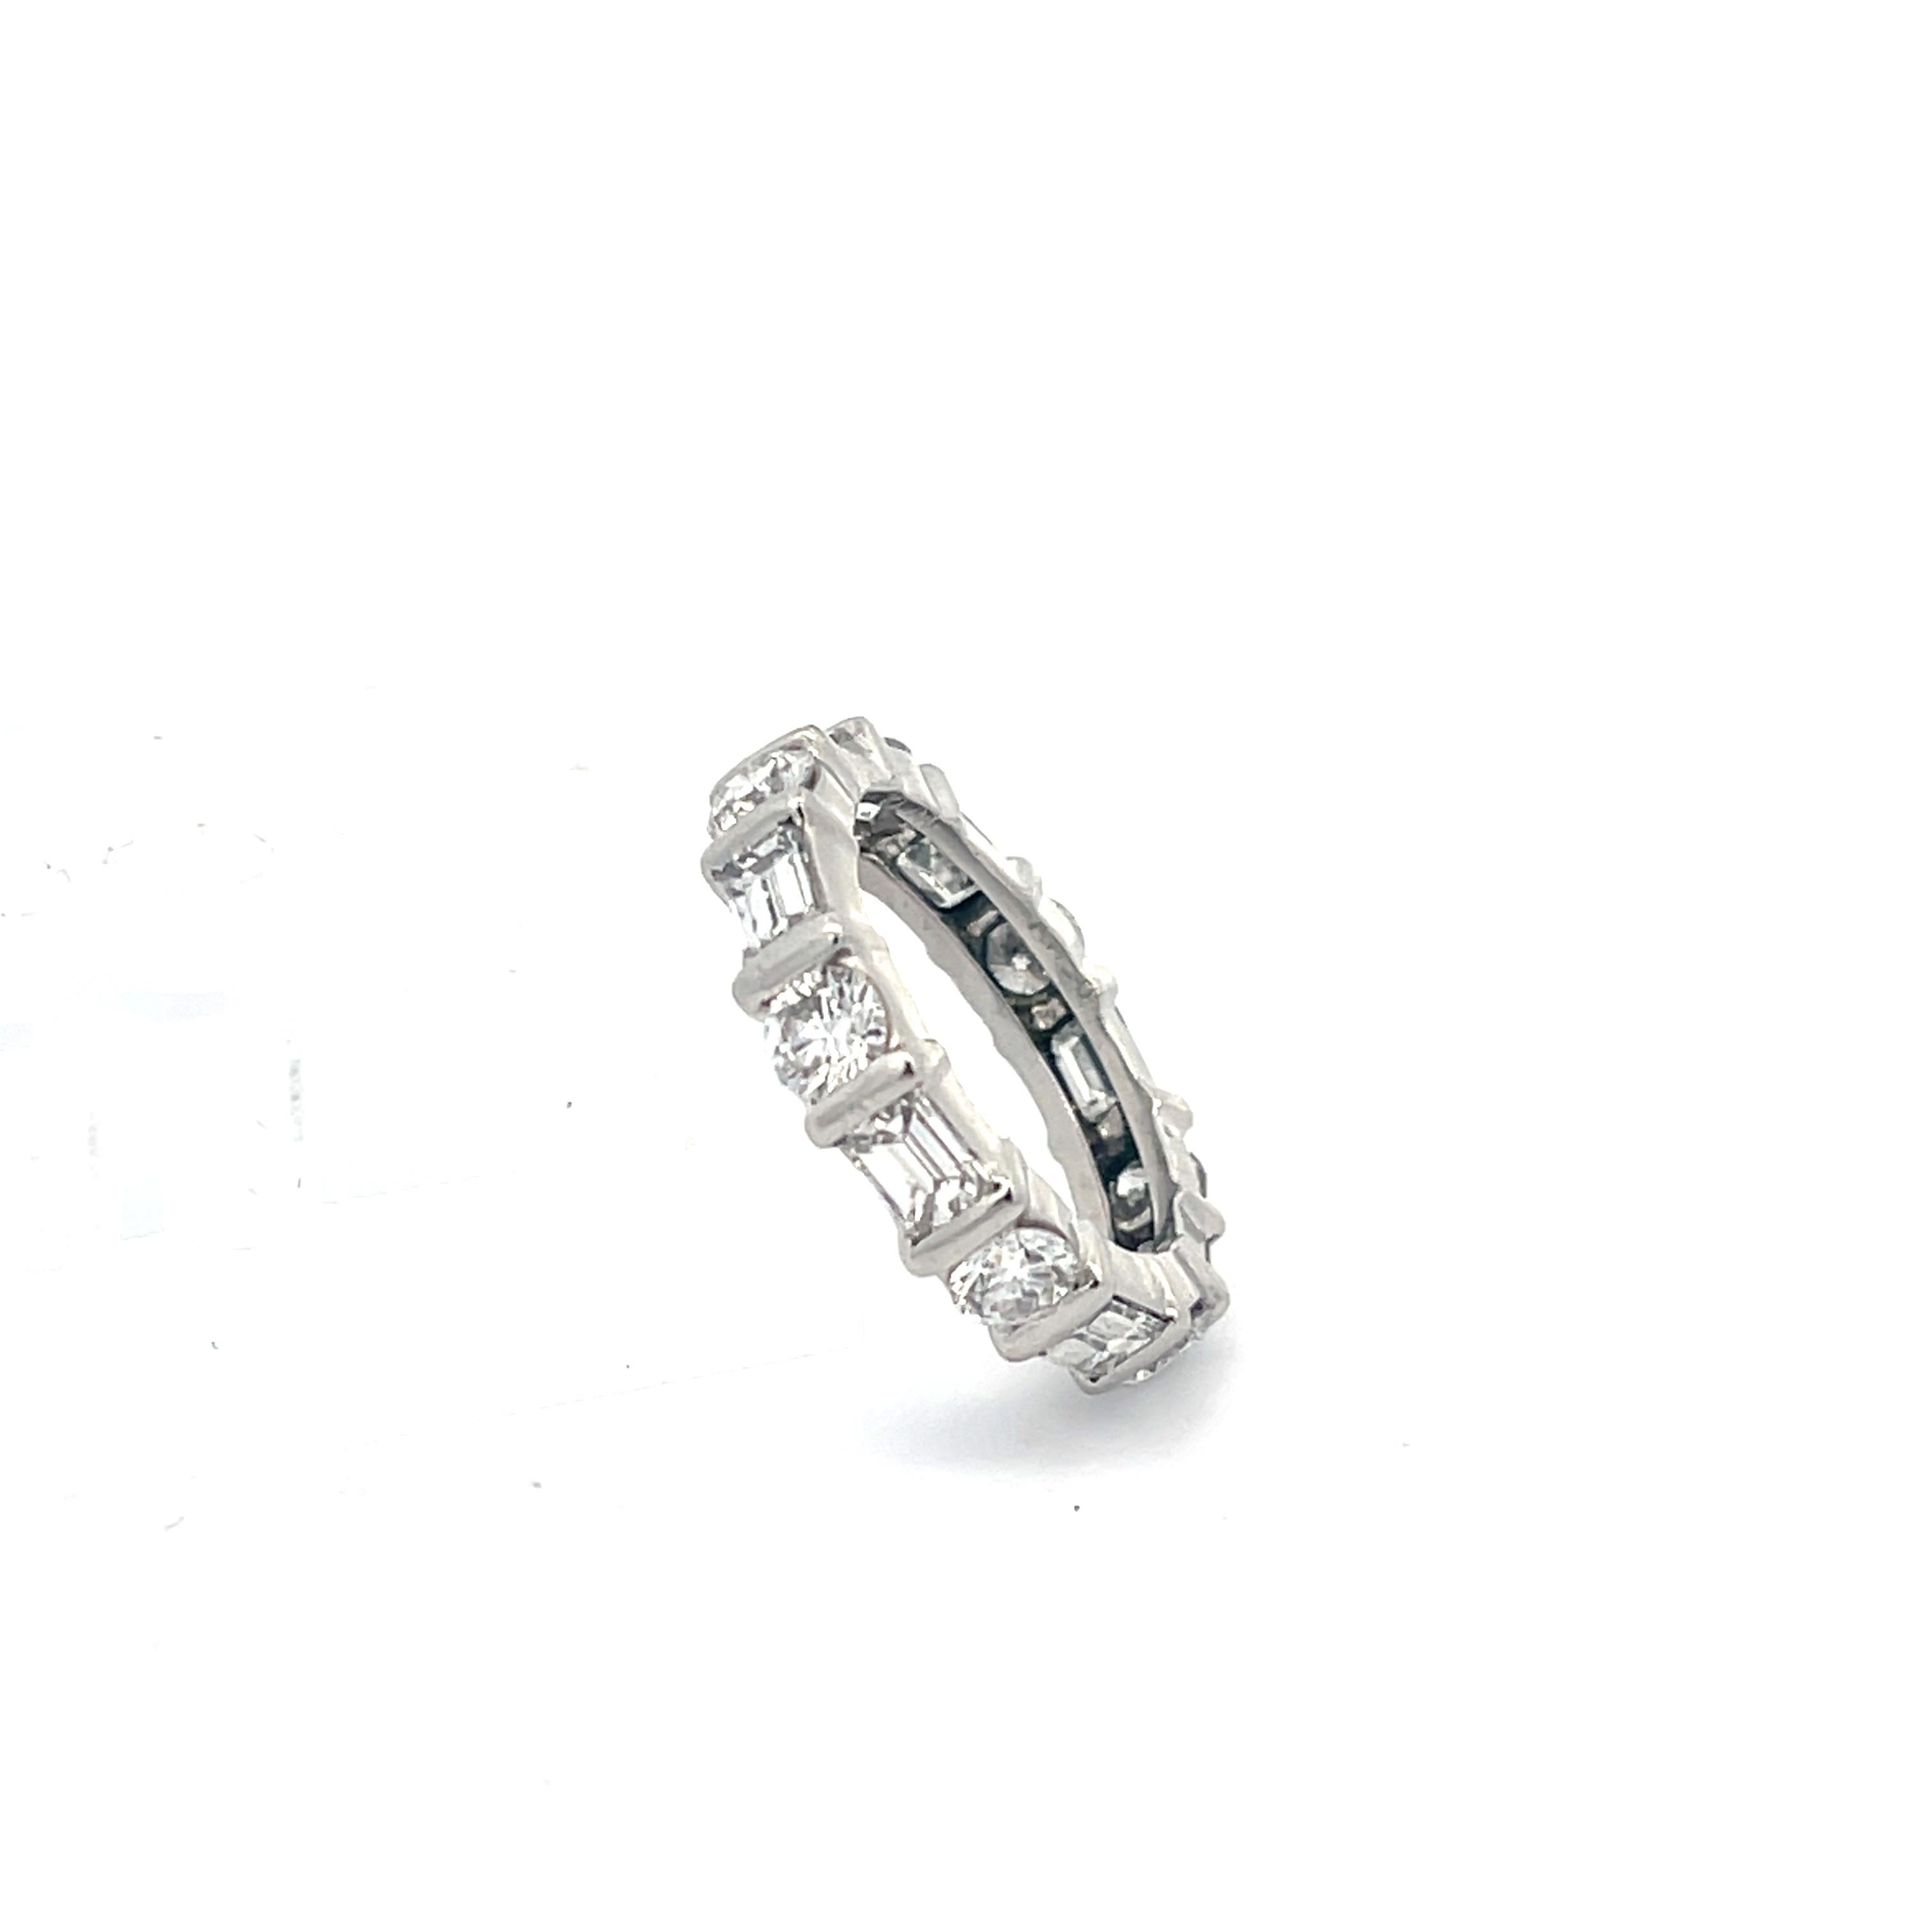 Kwiat Diamond Eternity Band in Platinum. The eternity band features approximately 3ctw of brilliant round and emerald cut diamonds. Size 5 1/4
6.4 Grams
4.3mm Wide